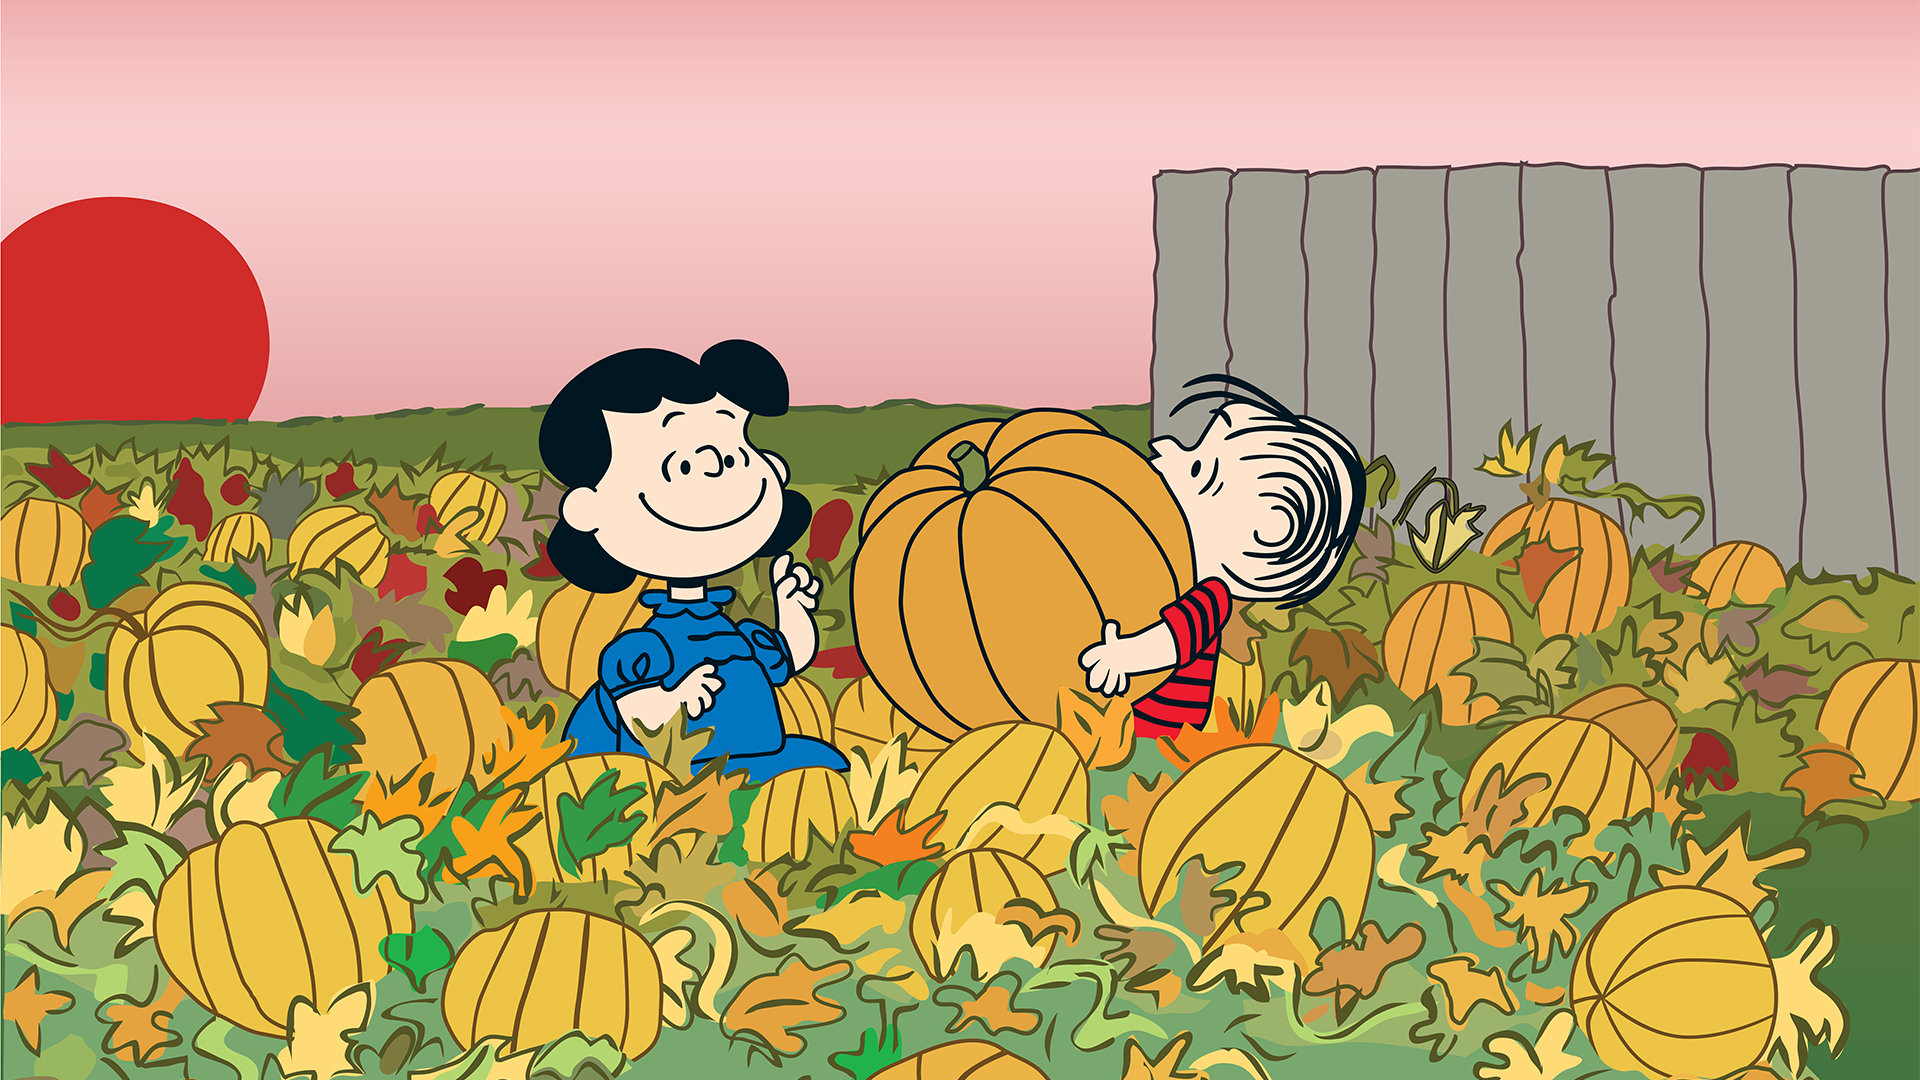 Three 'Peanuts' specials are coming to NPT this fall! - NPT Media Update